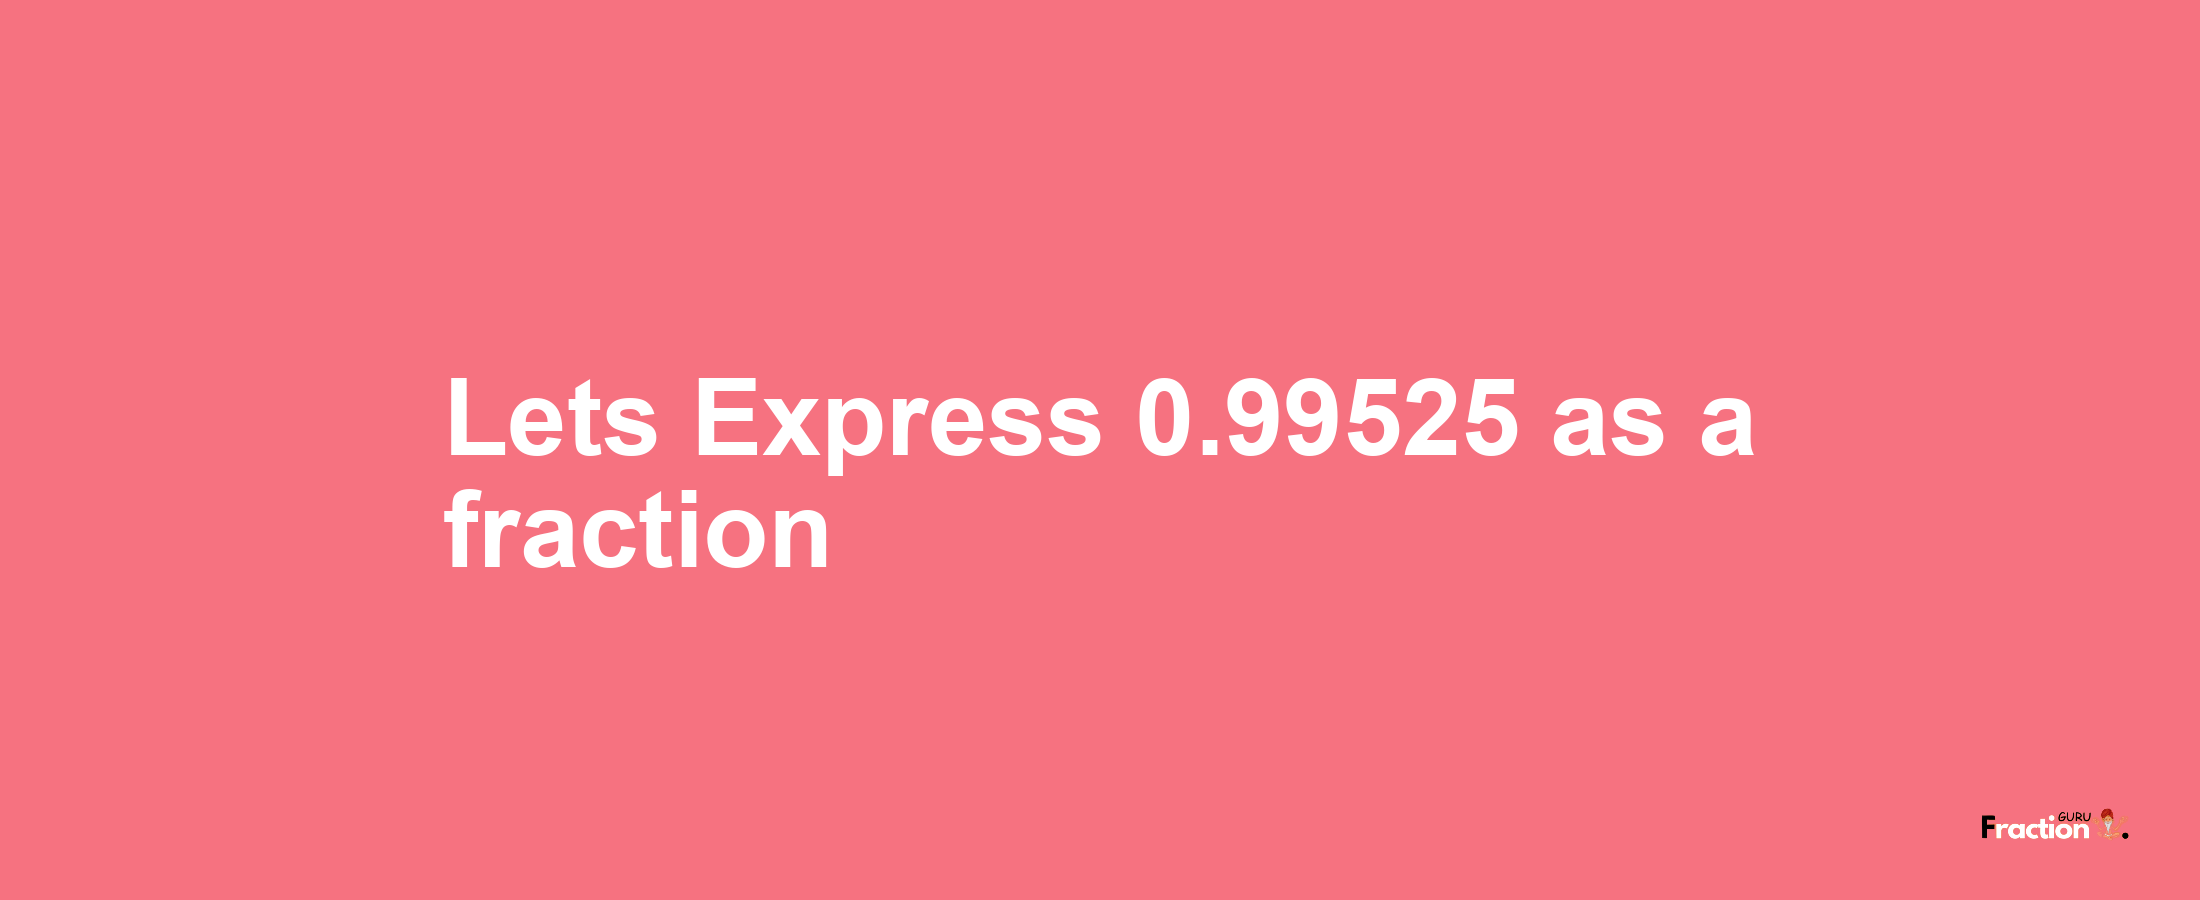 Lets Express 0.99525 as afraction